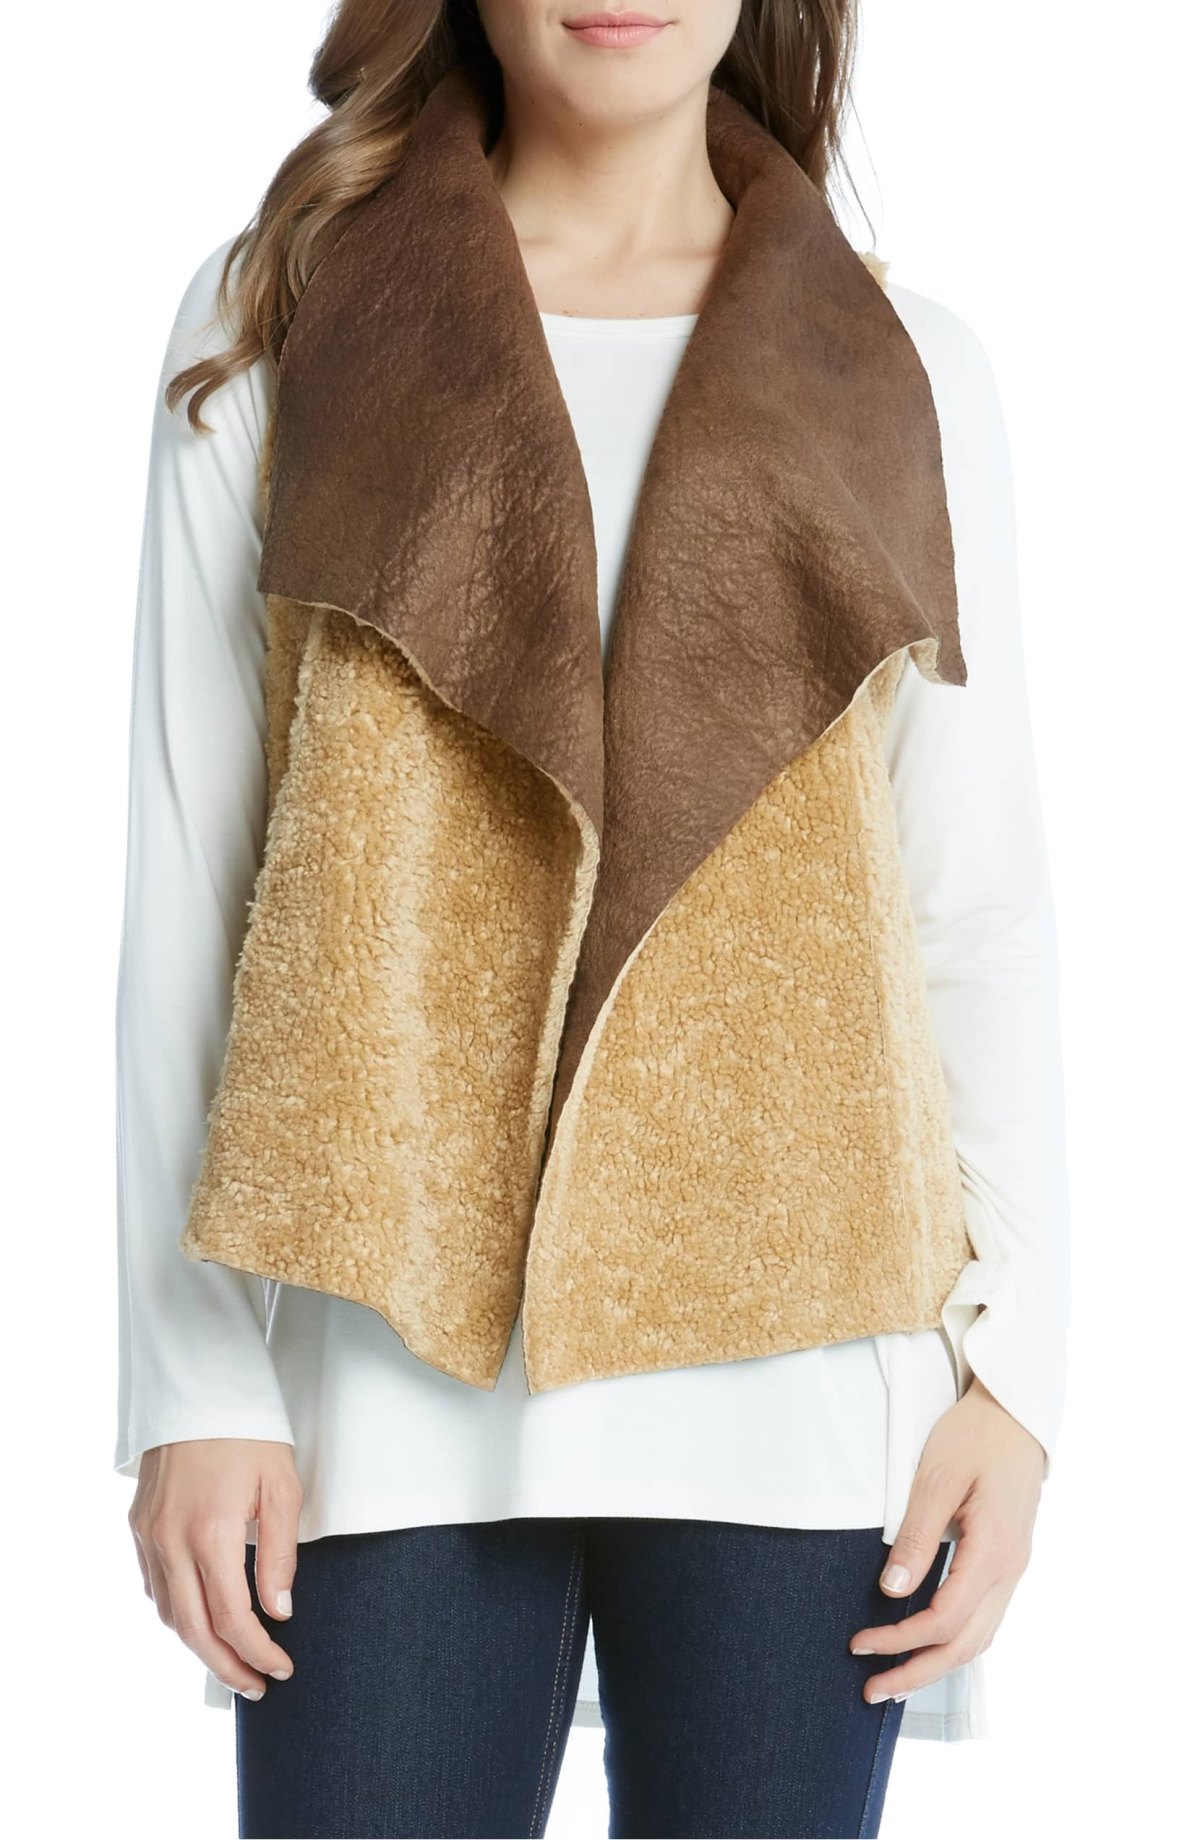 Shop This Reversible Faux Shearling Vest for Two Fall Looks | UsWeekly